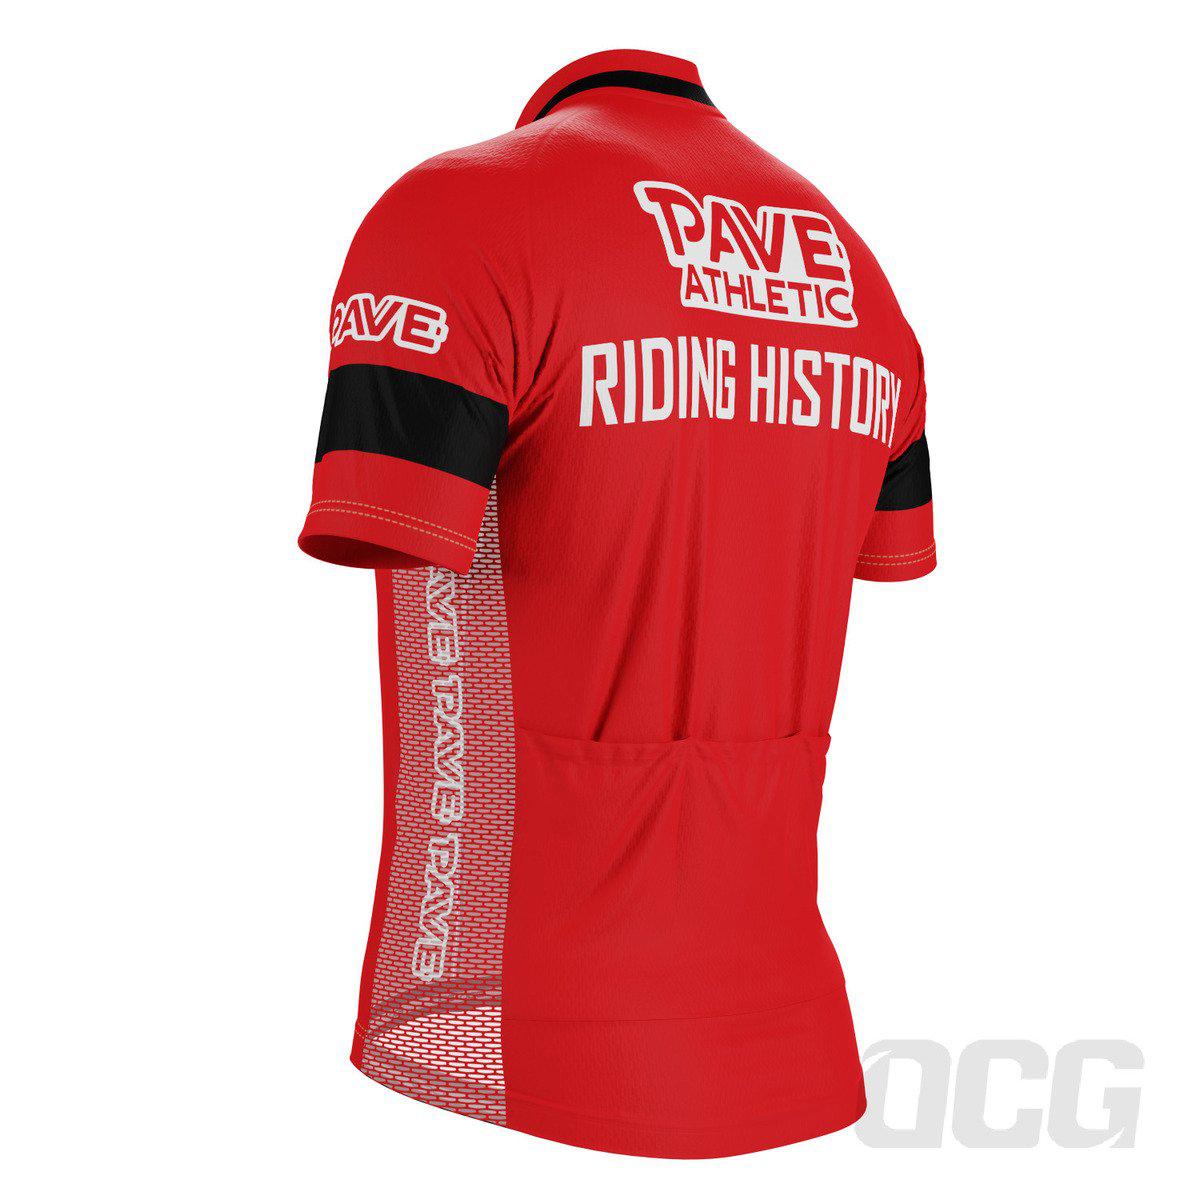 PAVE Athletic Going Solo Retro Short Sleeve Cycling Jersey